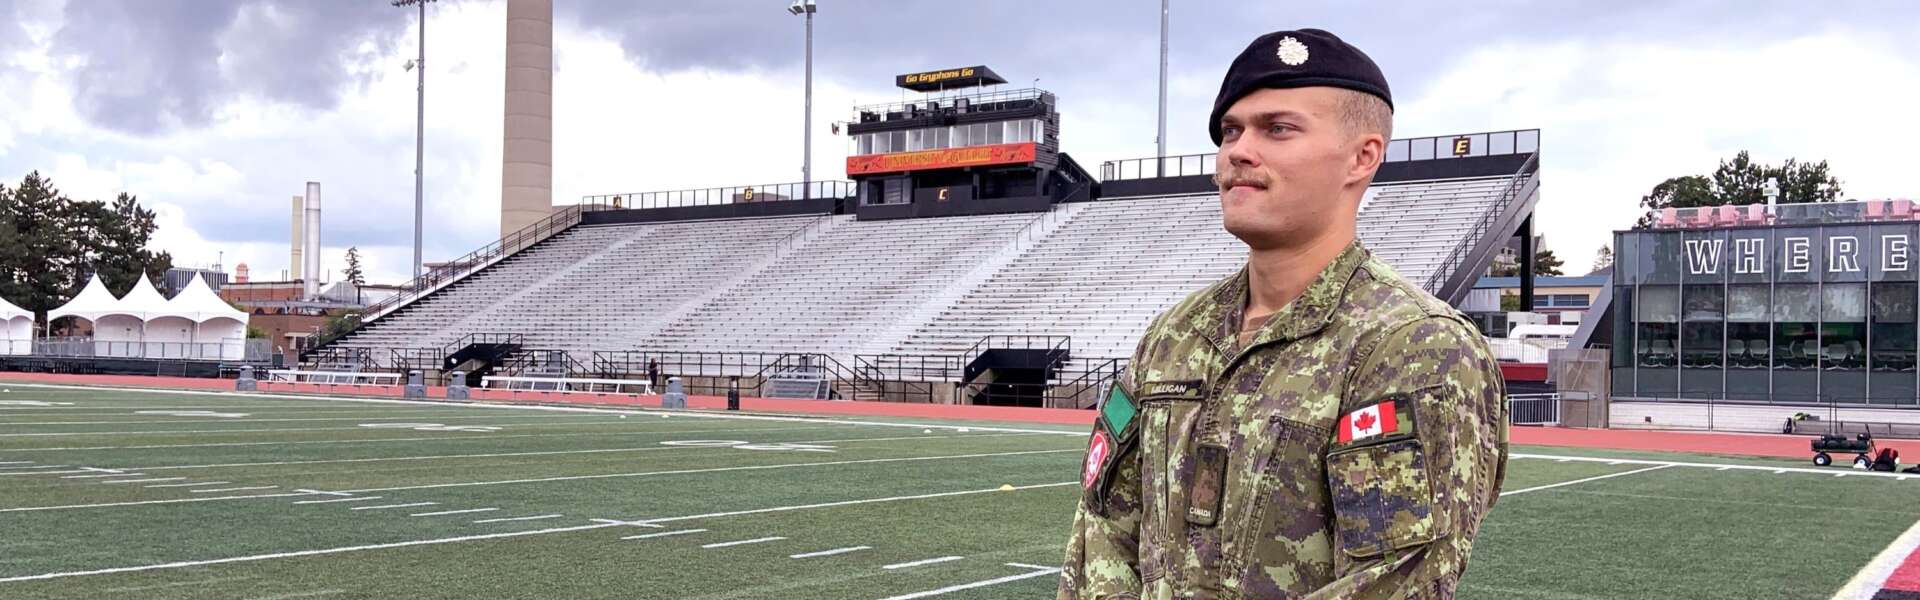 a reservist soldier wears an operational uniform while standing on a football field with bleachers behind